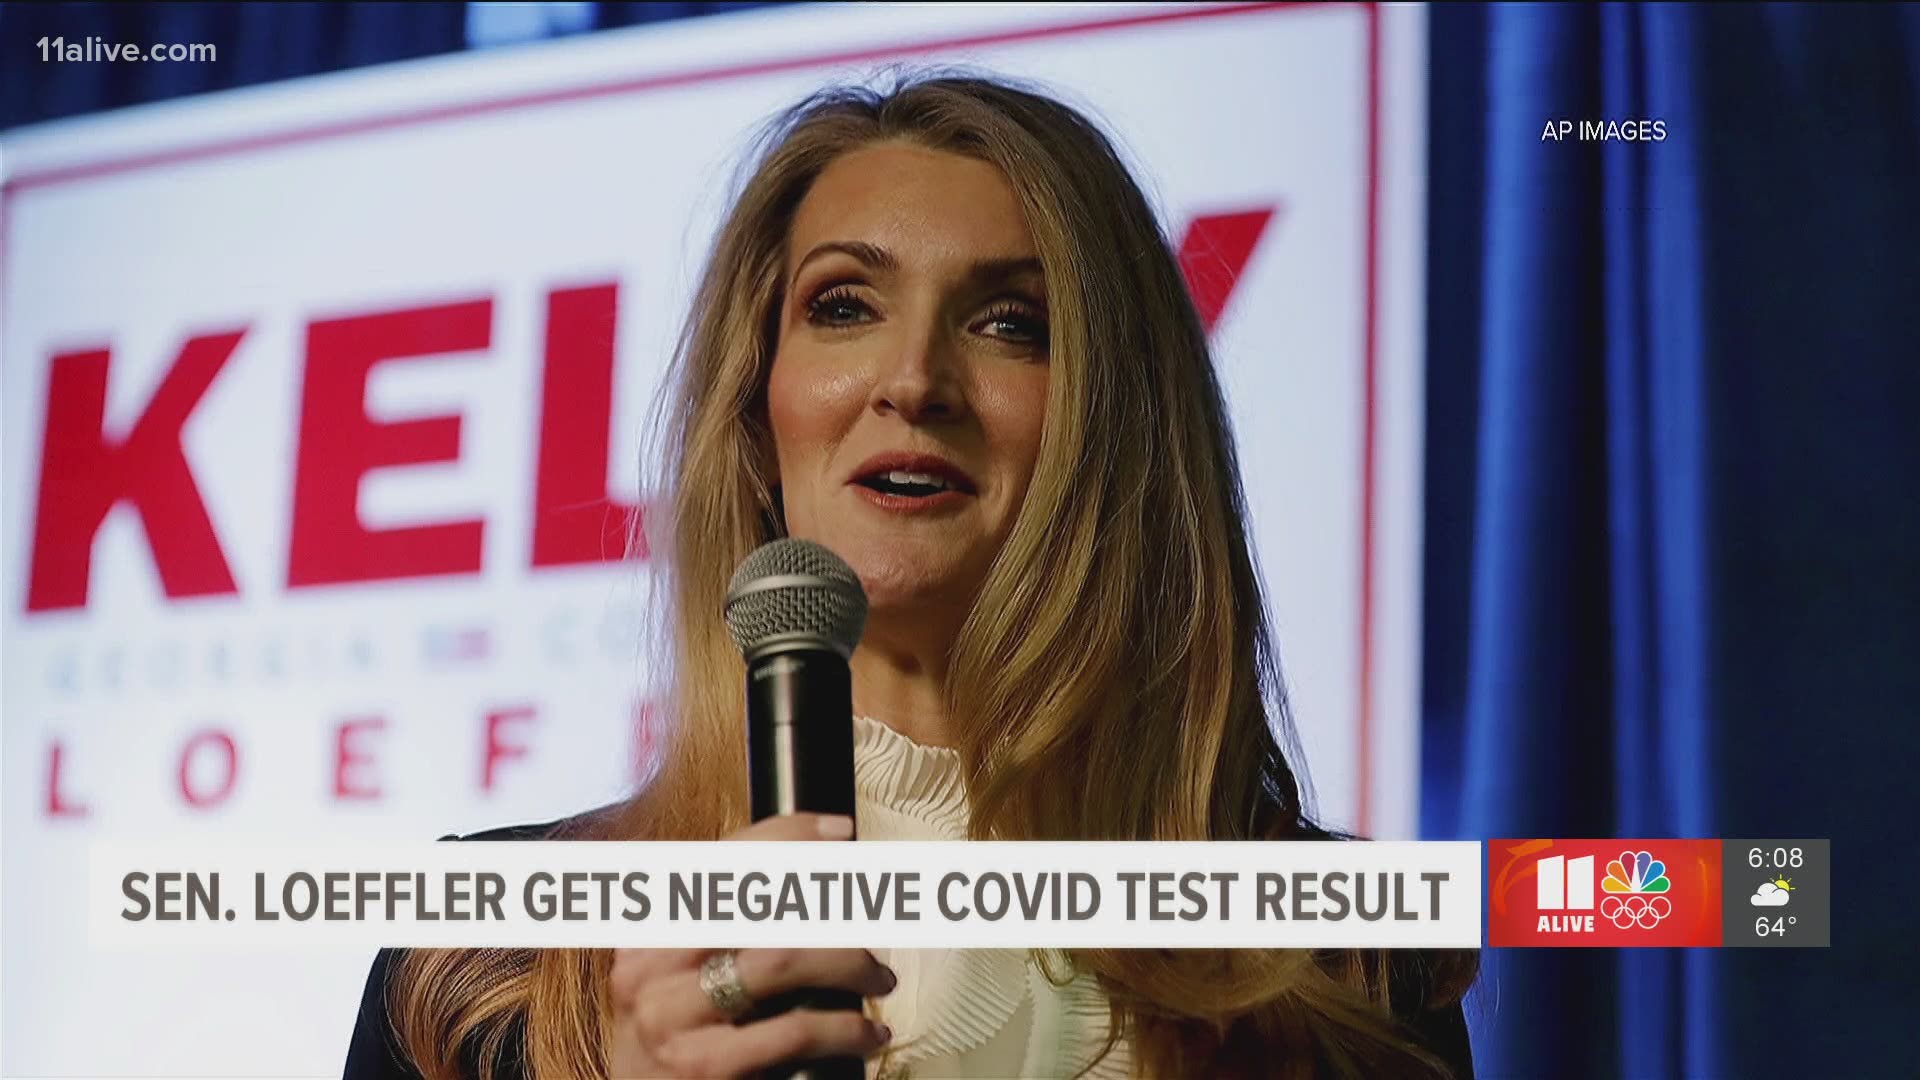 The news comes one day after the announcement of conflicting tests that included a negative rapid test, a positive PCR test and an inconclusive additional test.